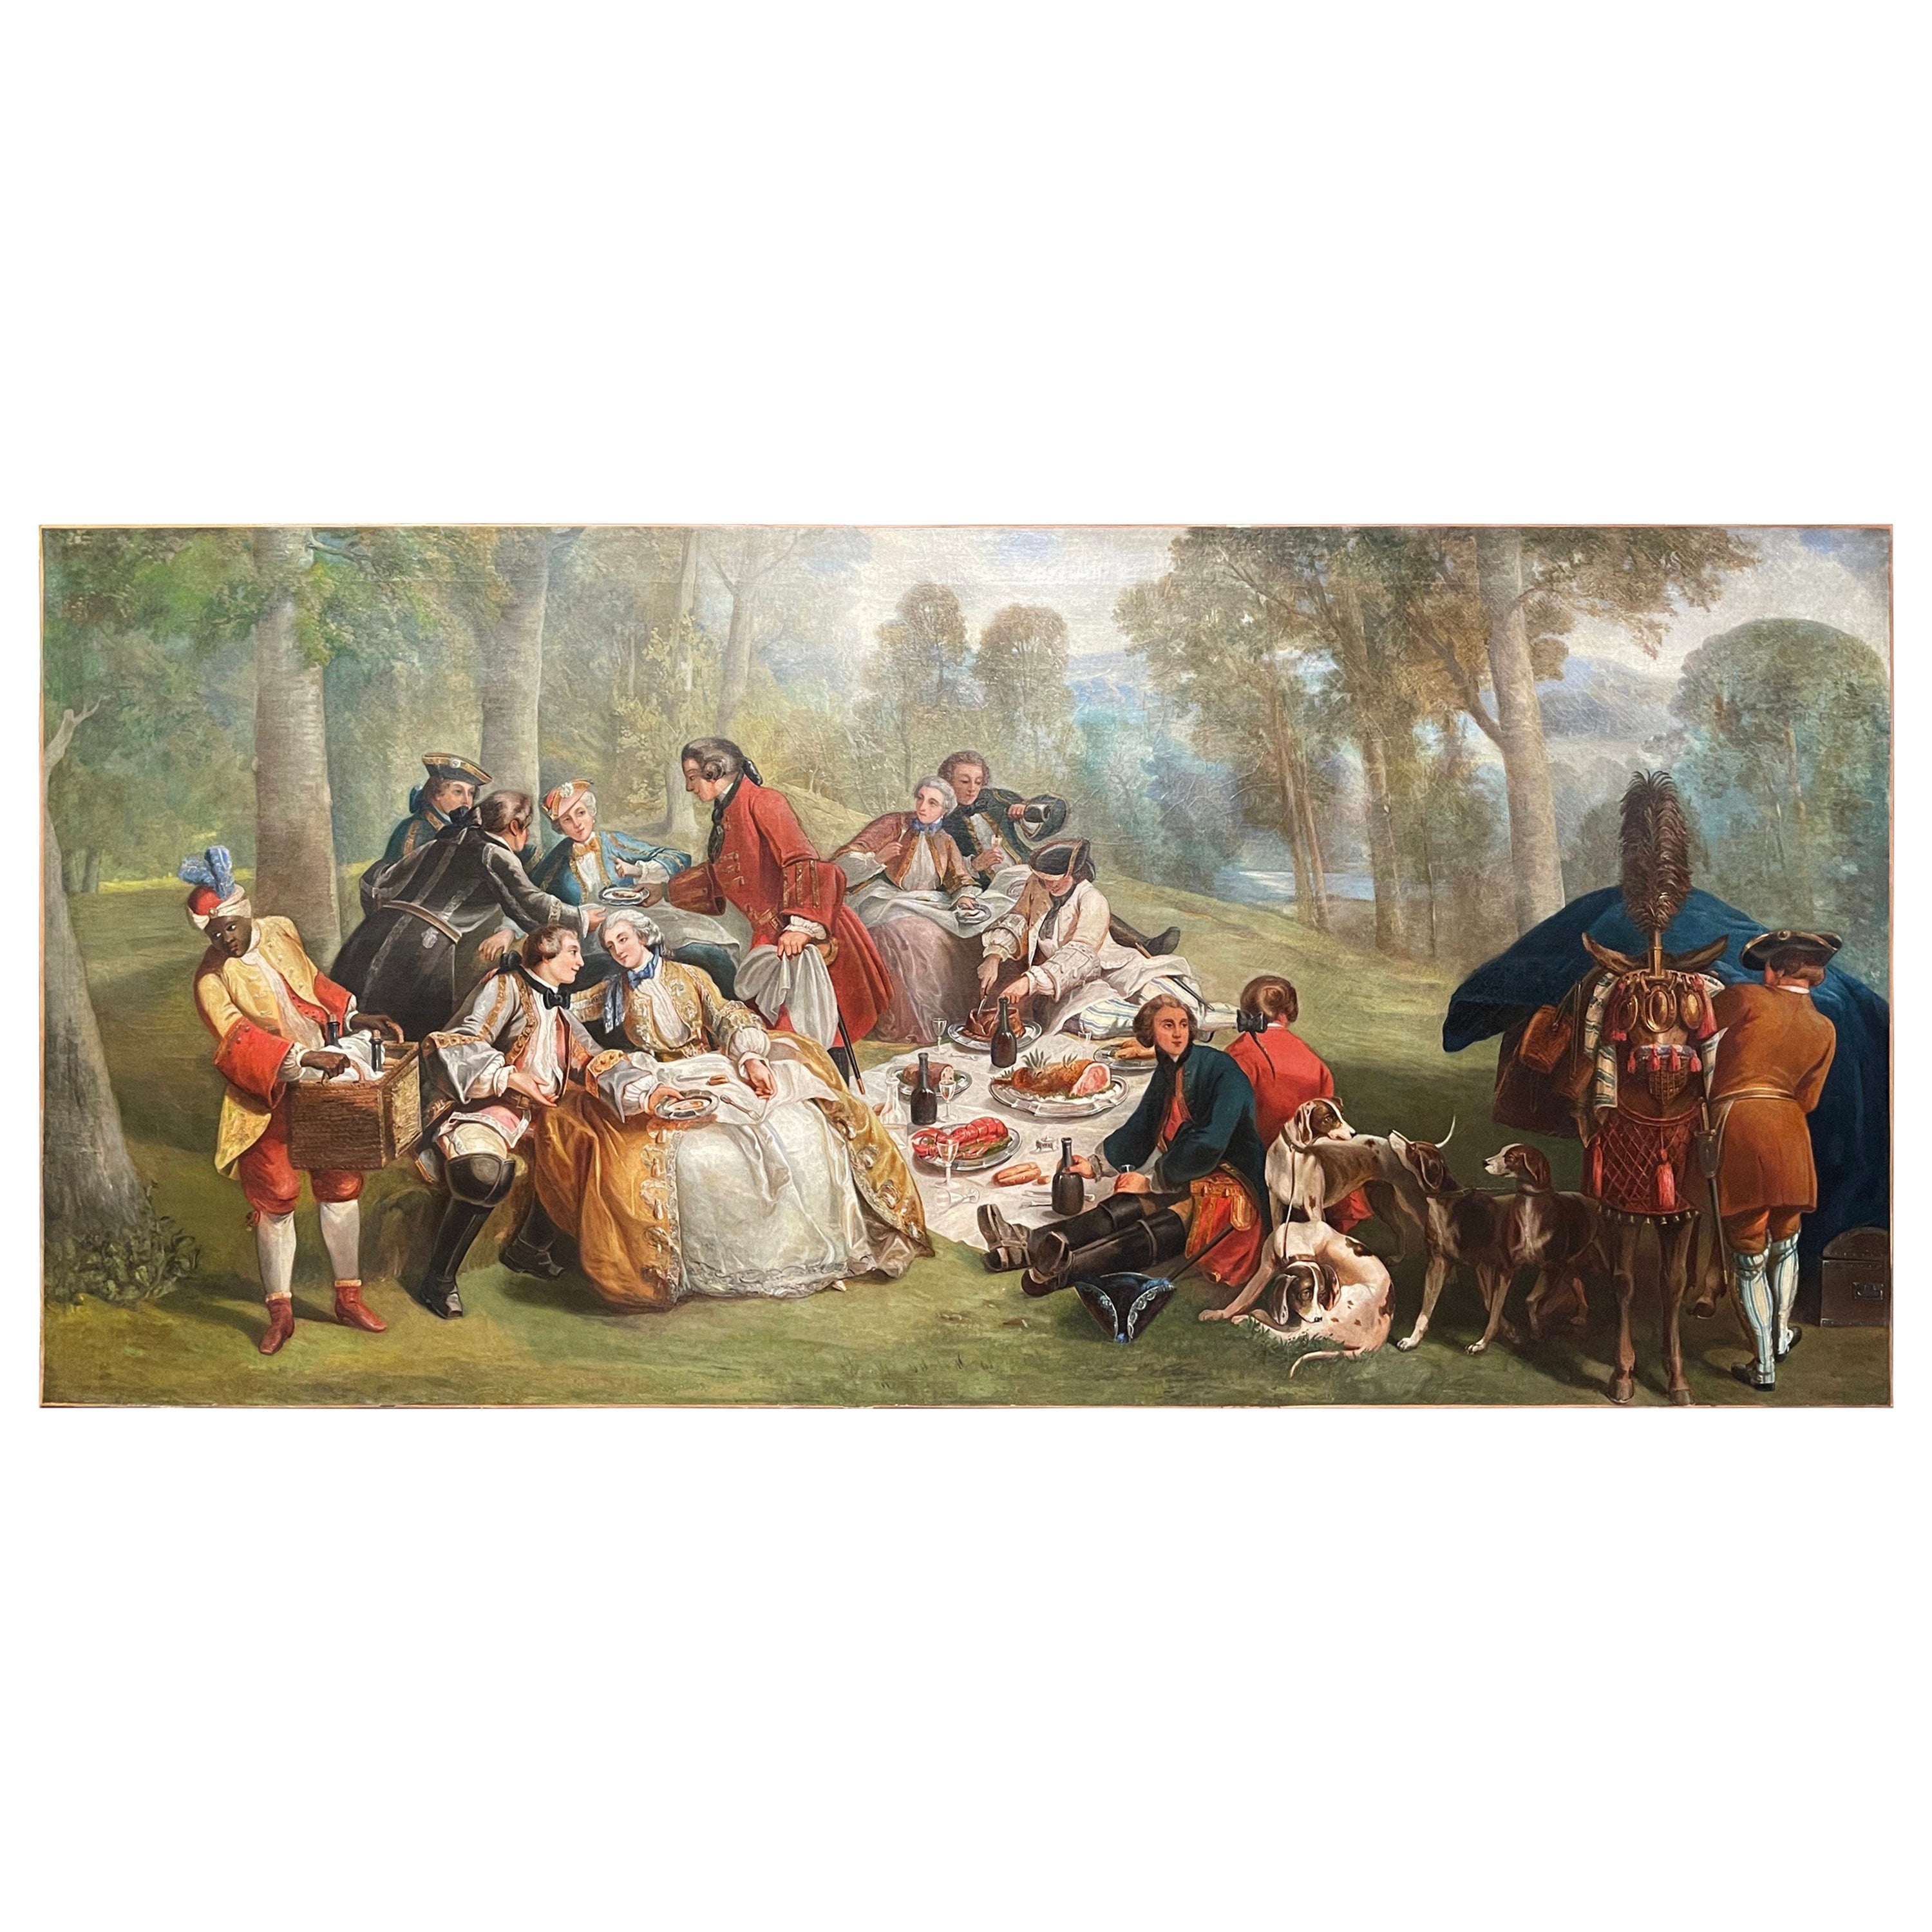 19th Century French Oil on Canvas Painting "La Halte de Chasse" After C. Van Loo